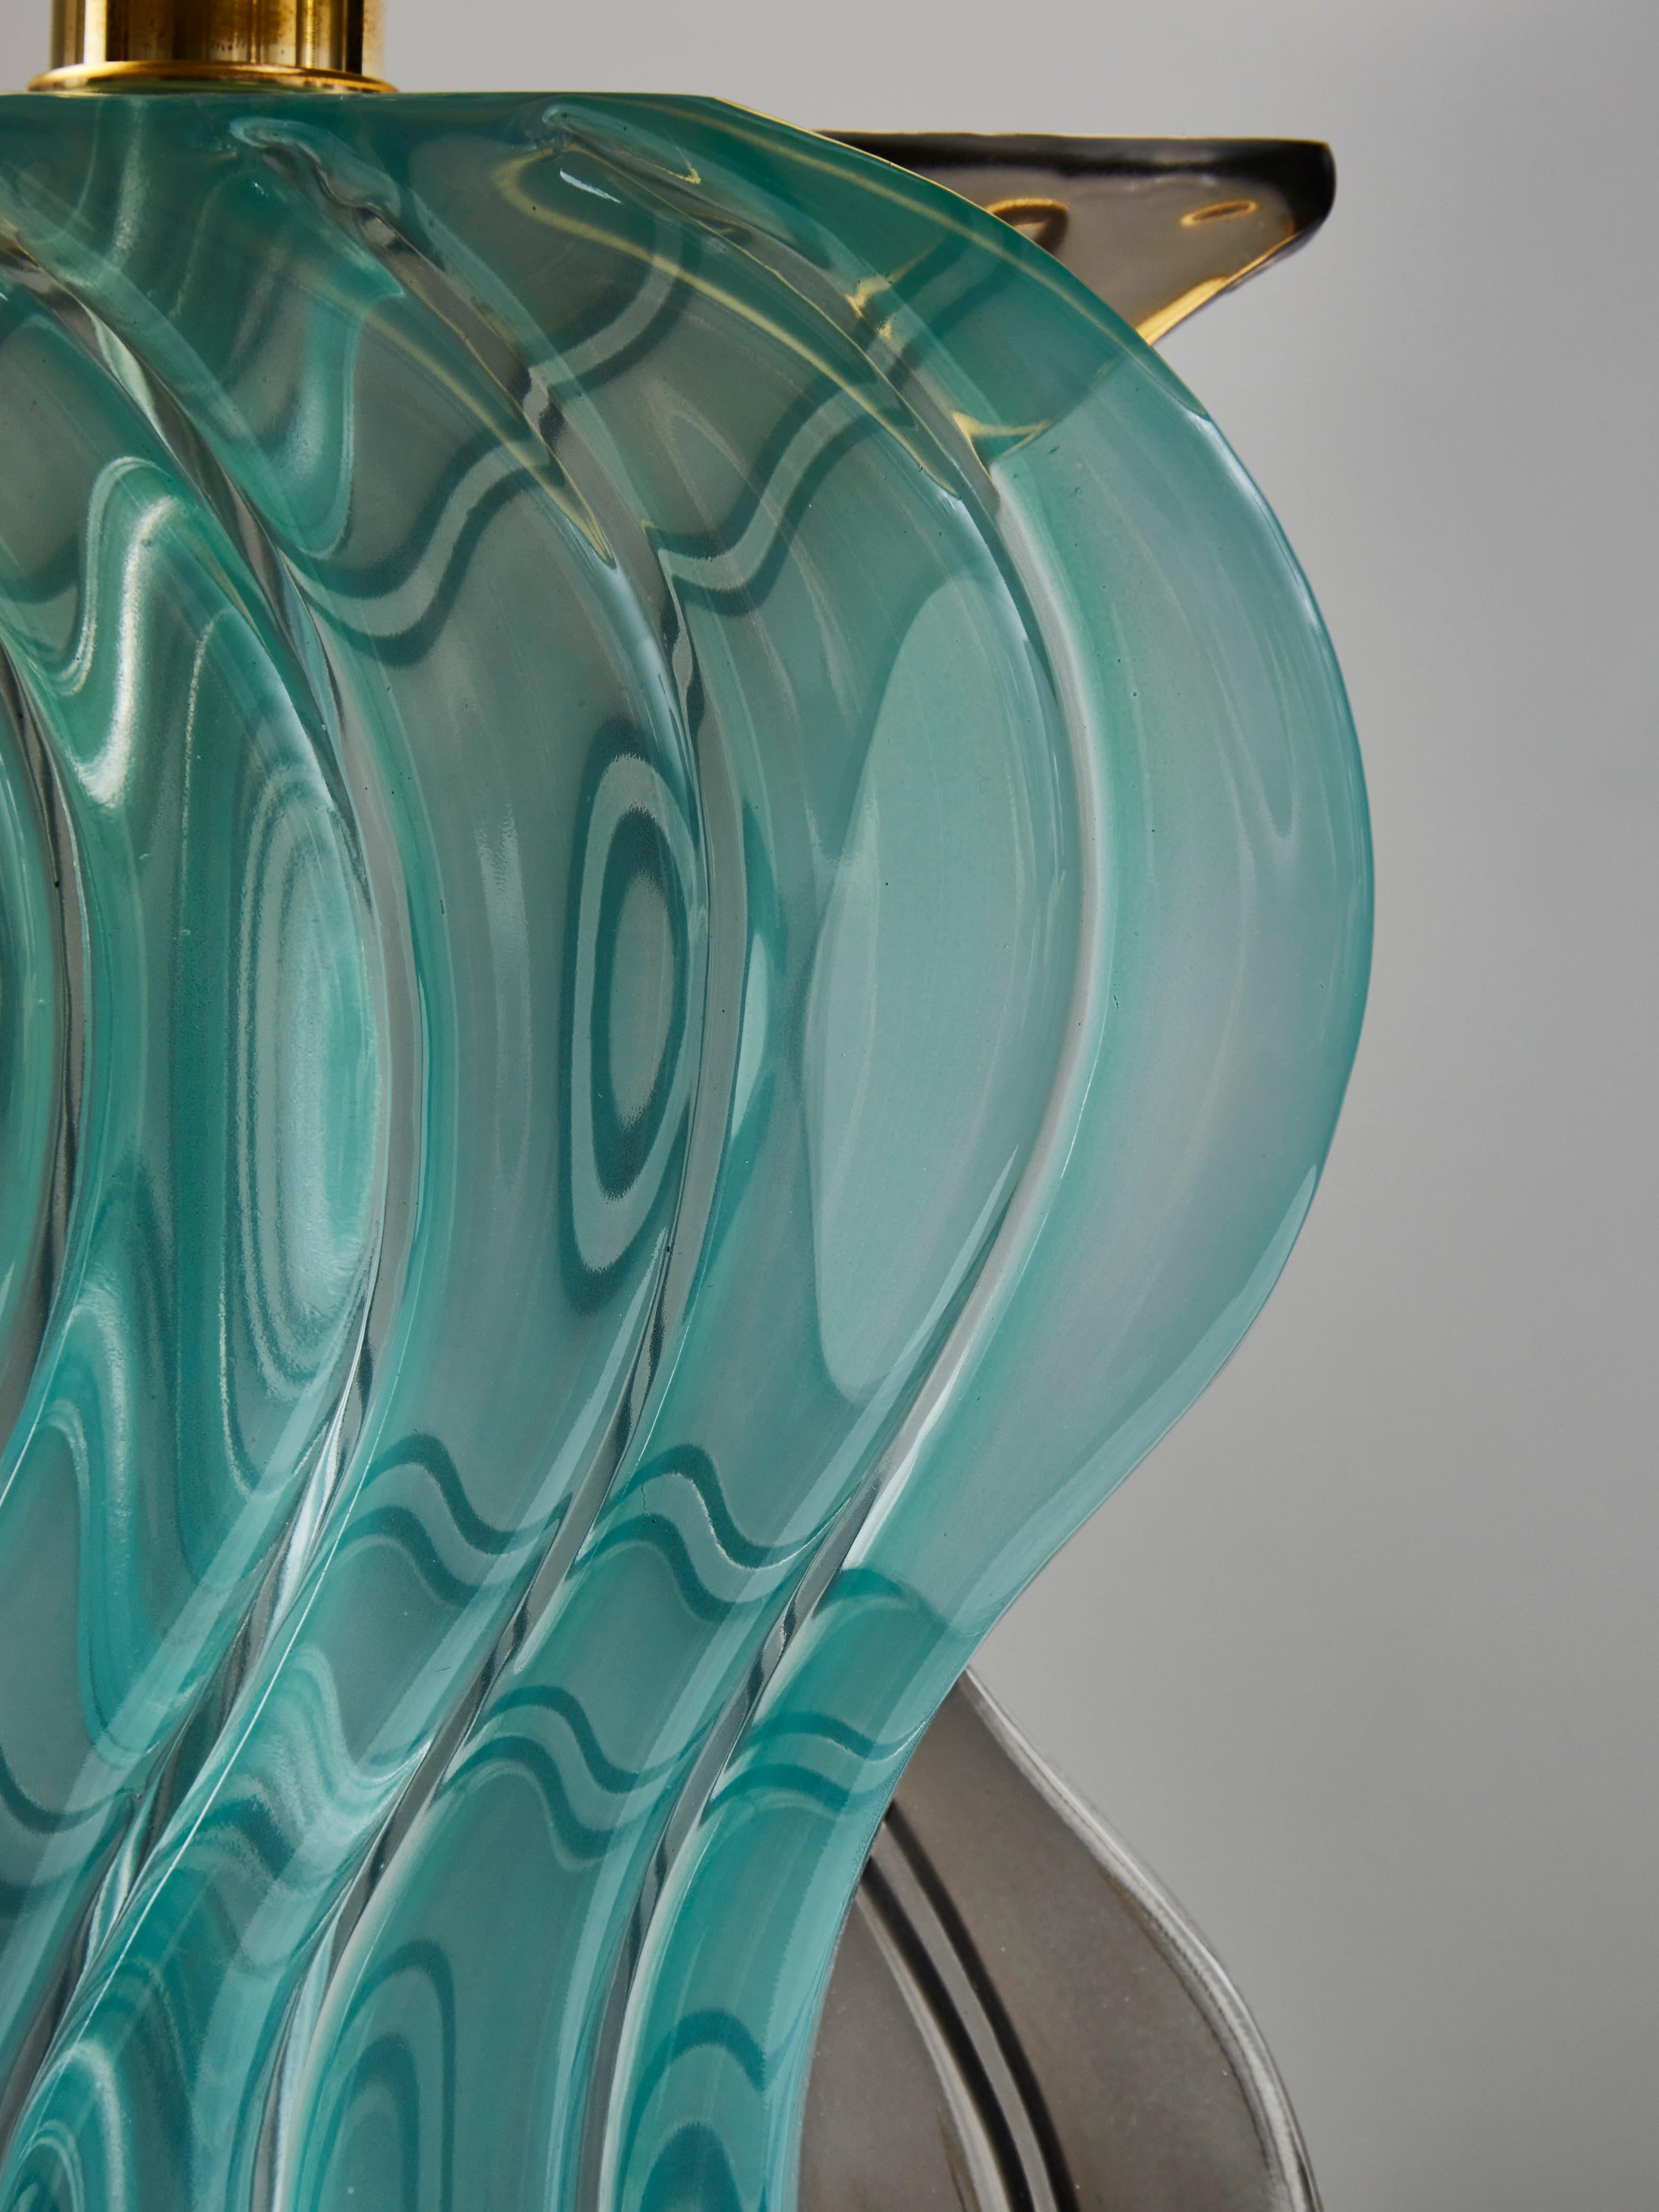 Pair of Teal and Grey Murano Glass Table Lamps 1